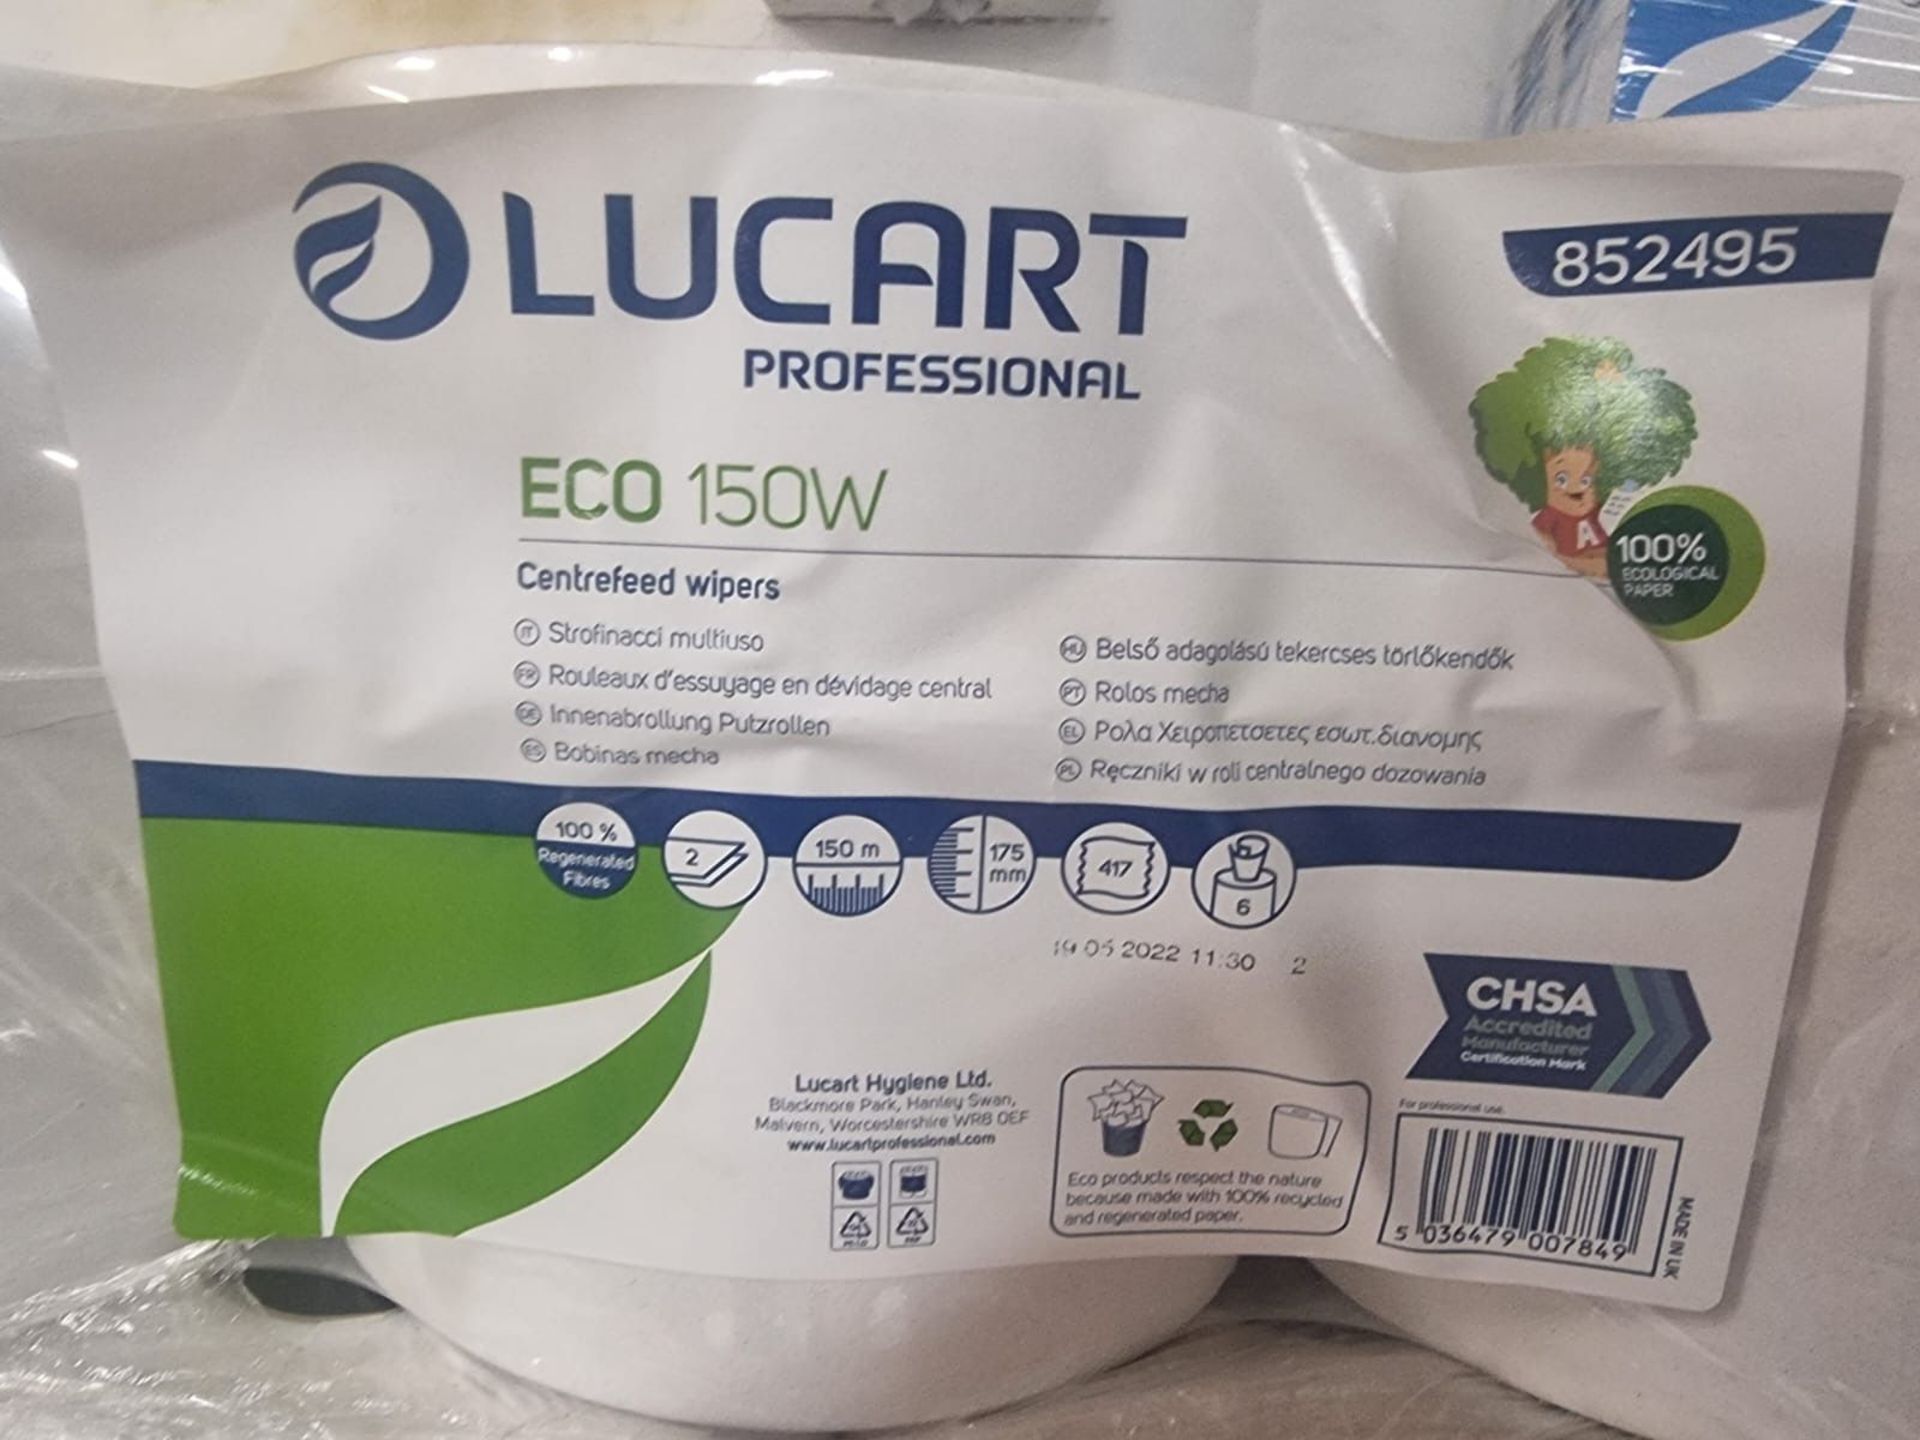 Pallet To Contain 24 x New Packs of 6 Lucart Professional Eco 150W Centrefeed Wipers. 150m x - Bild 2 aus 3